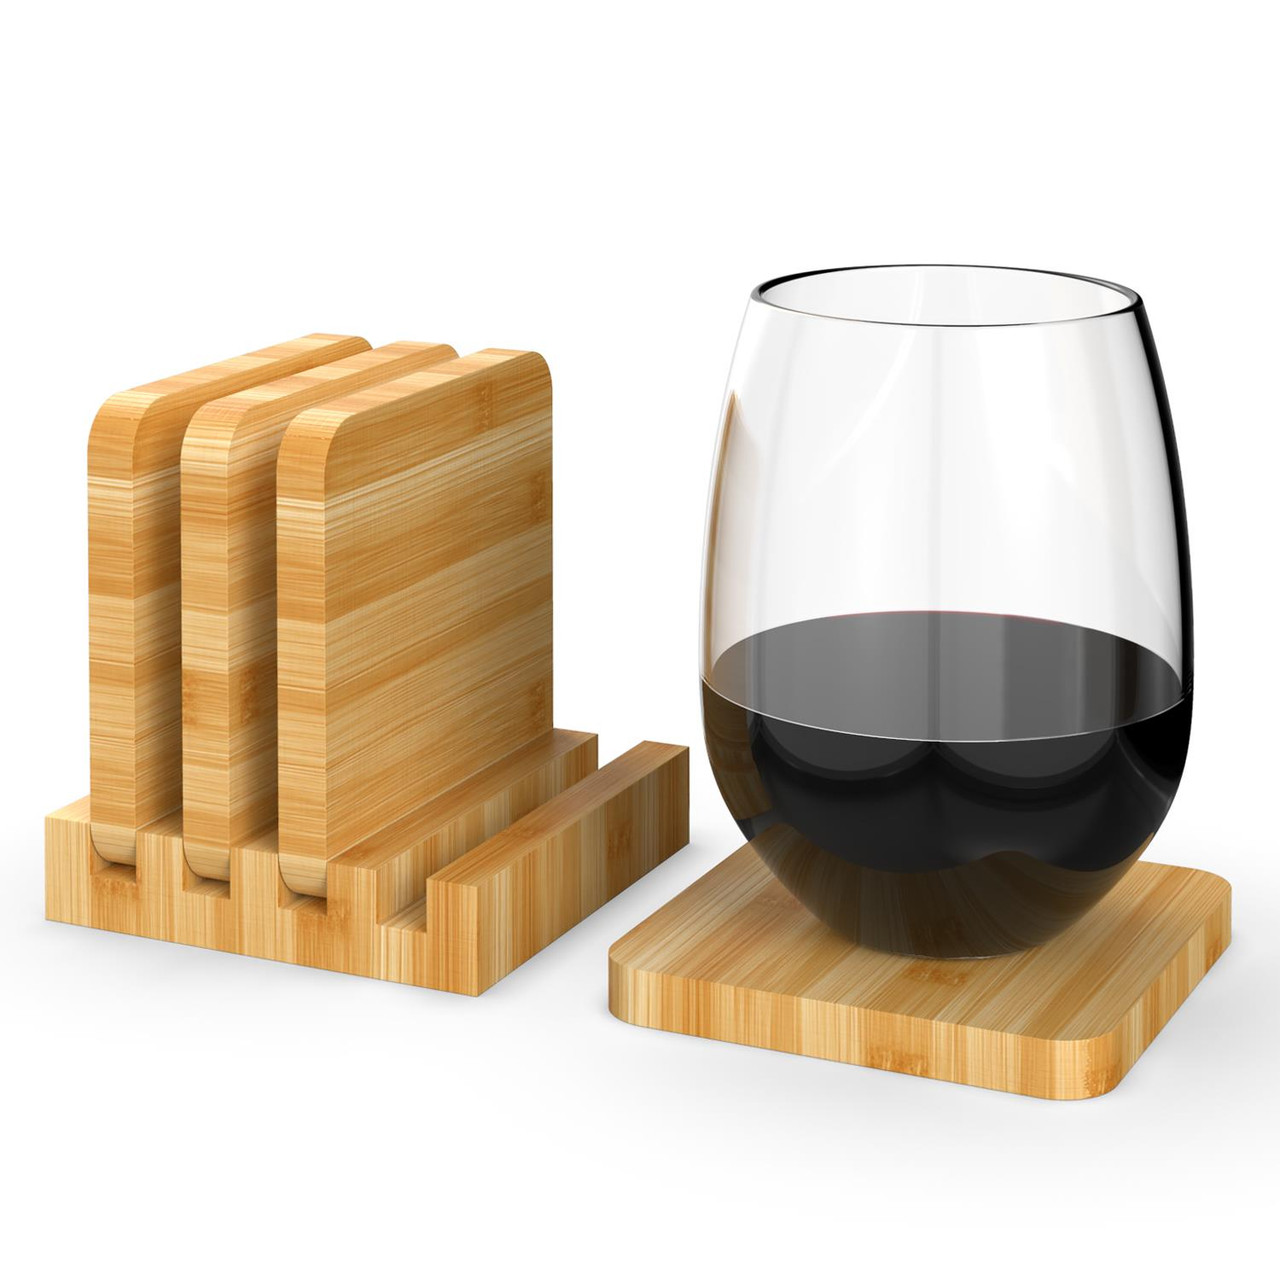 Wood Coasters for Drinks, Wooden Drink Coasters for Home Kitchen Table Housewarming Gift, Size: 3.46*3.46*0.35, Other